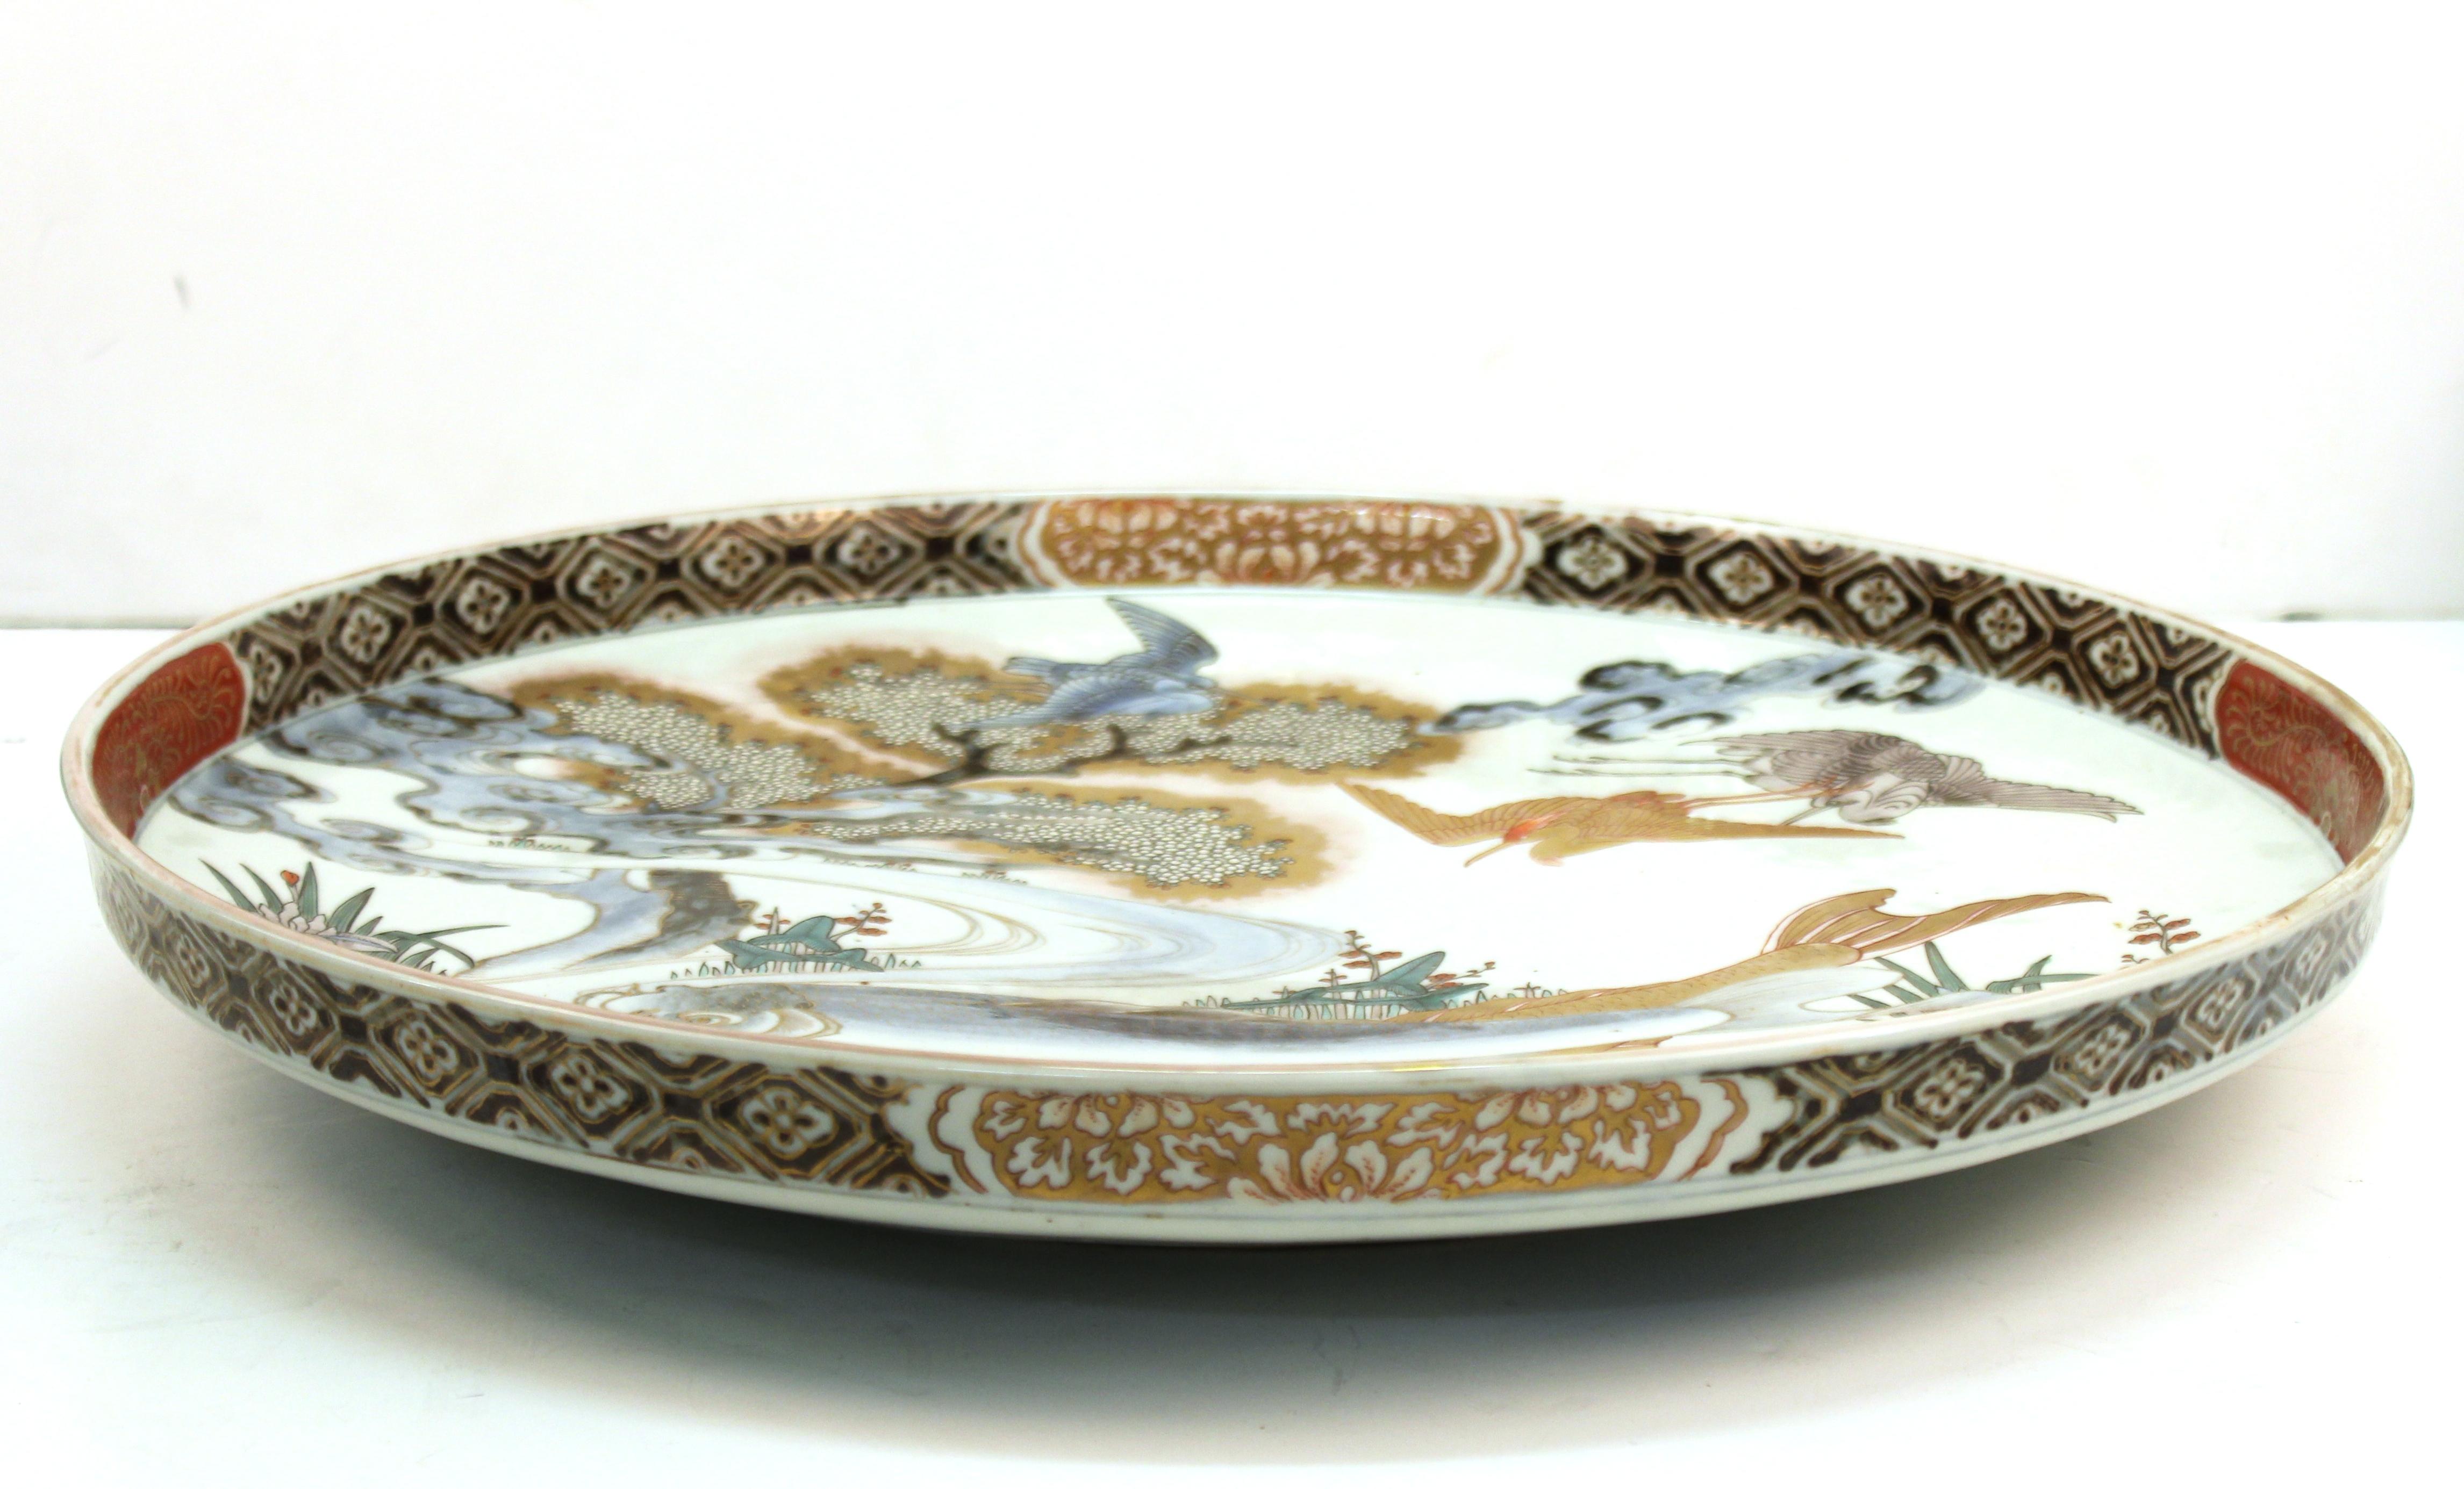 Japanese Meiji Porcelain Charger with Fish Theme For Sale 5